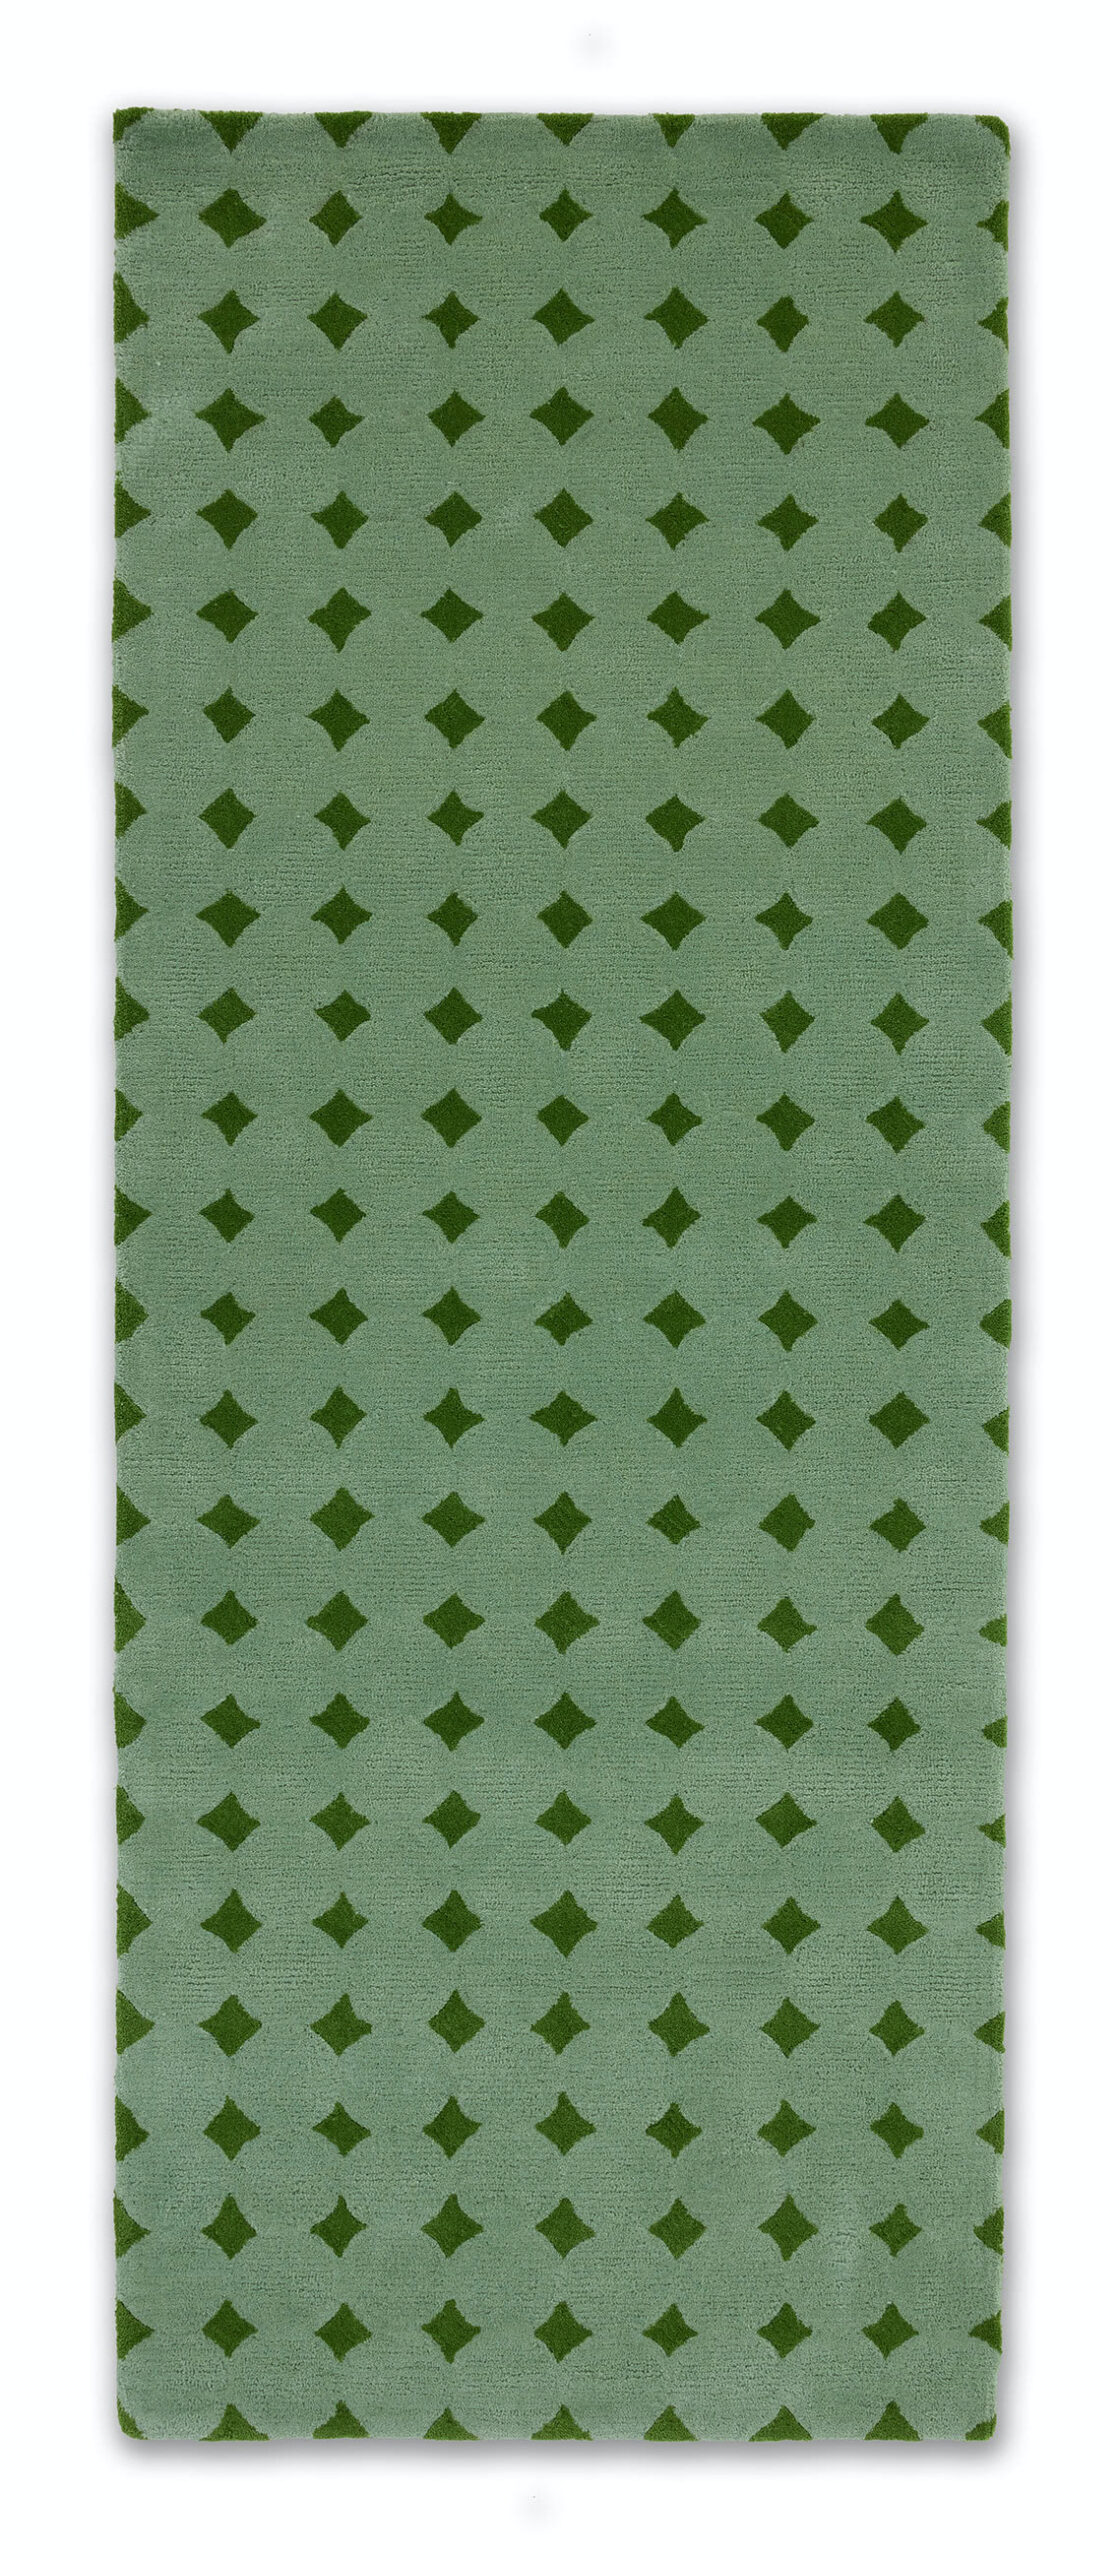 A green runner rug in 3 foot by 8 foot length called Bongo Fresca